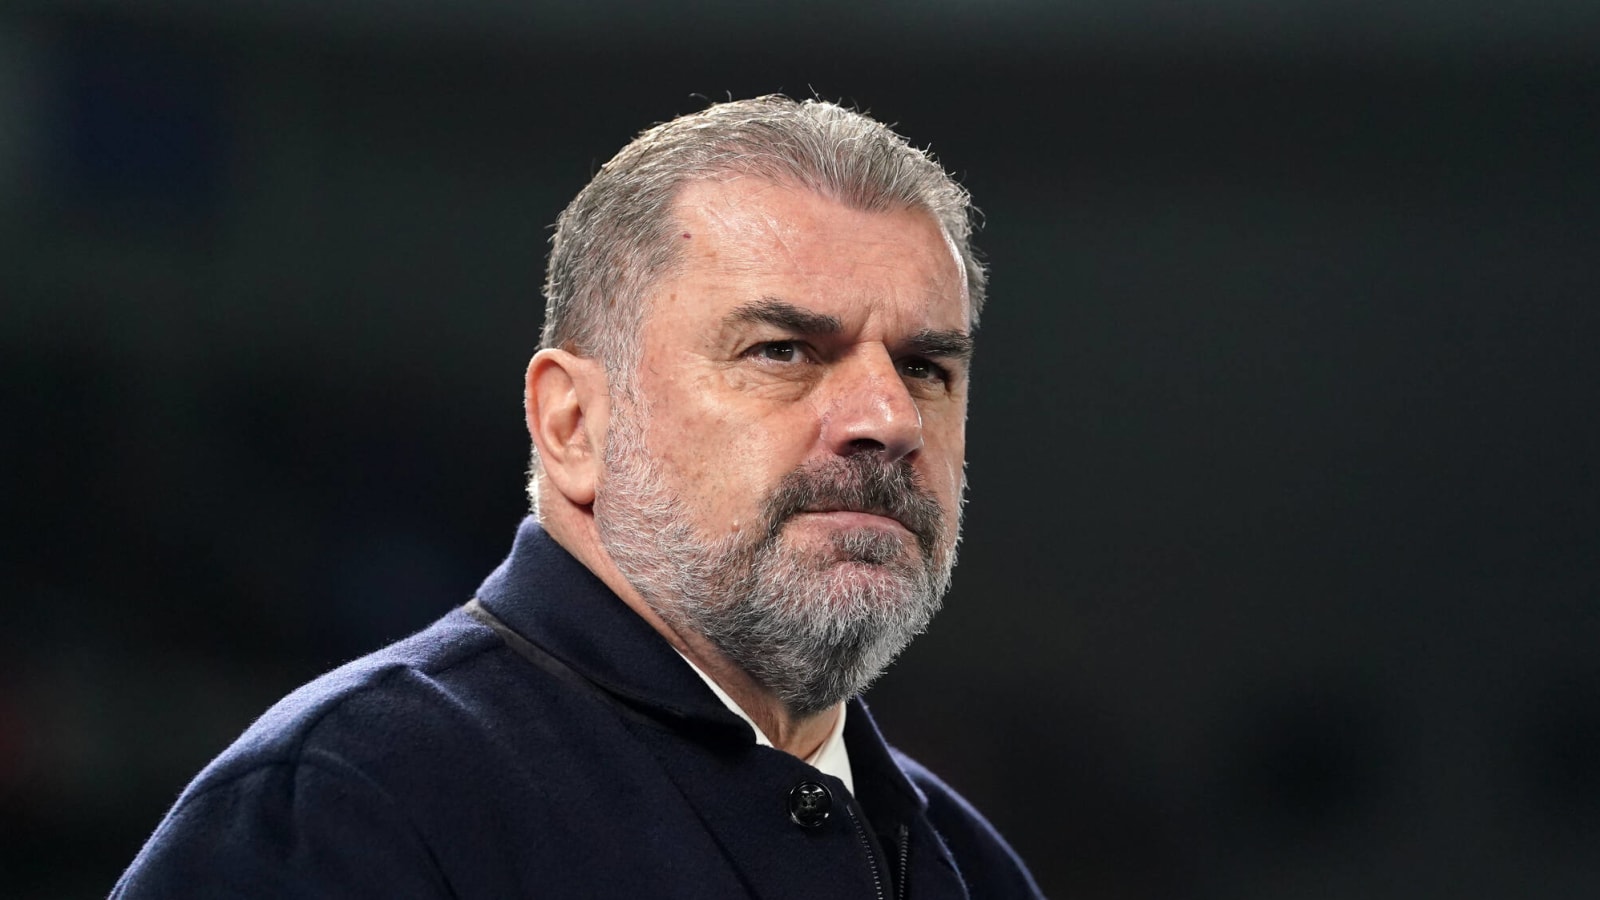 Ange Postecoglou has identified two positions he wants to strengthen this summer